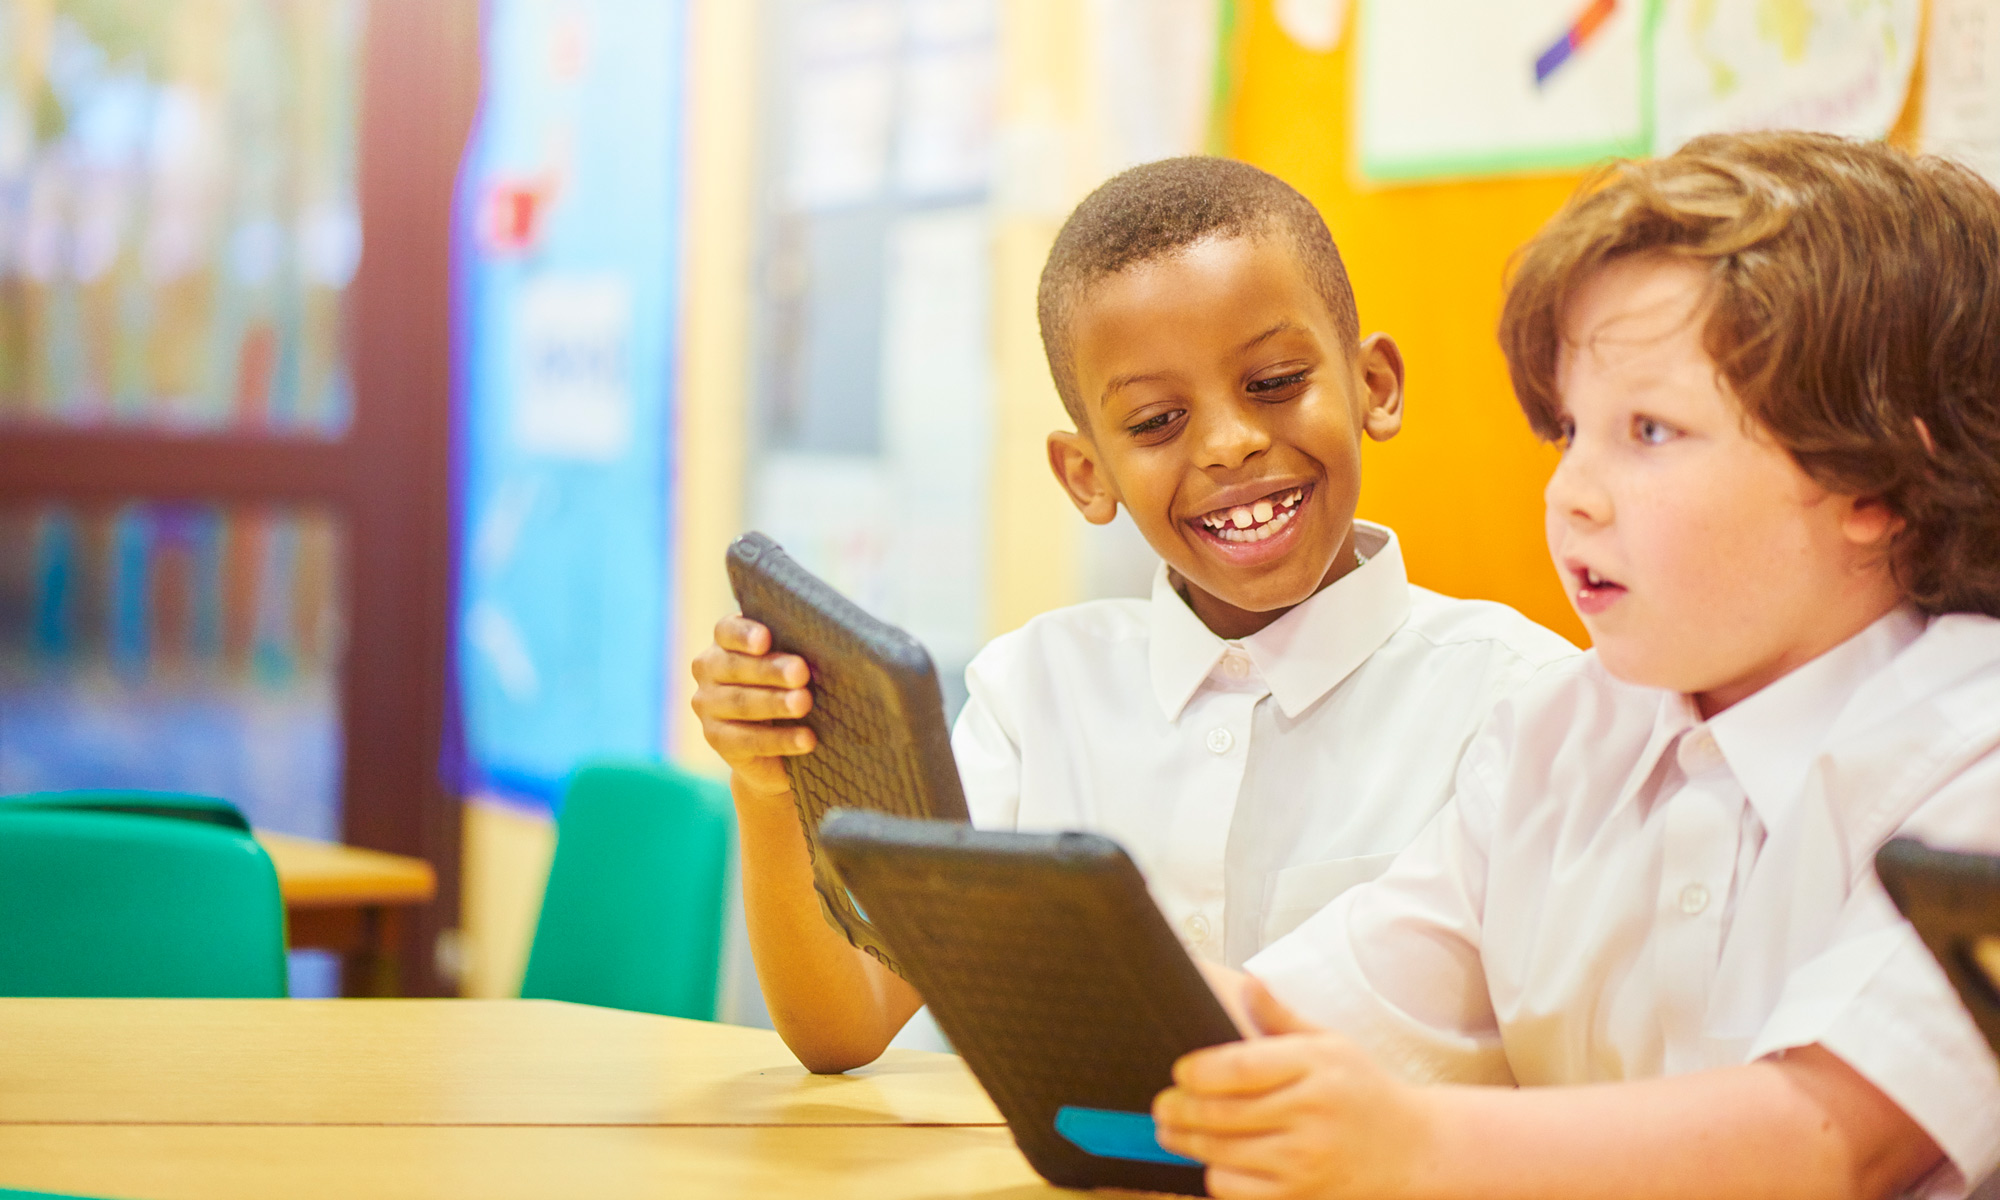 Technology In The Classroom - Transforming the Learning Experience